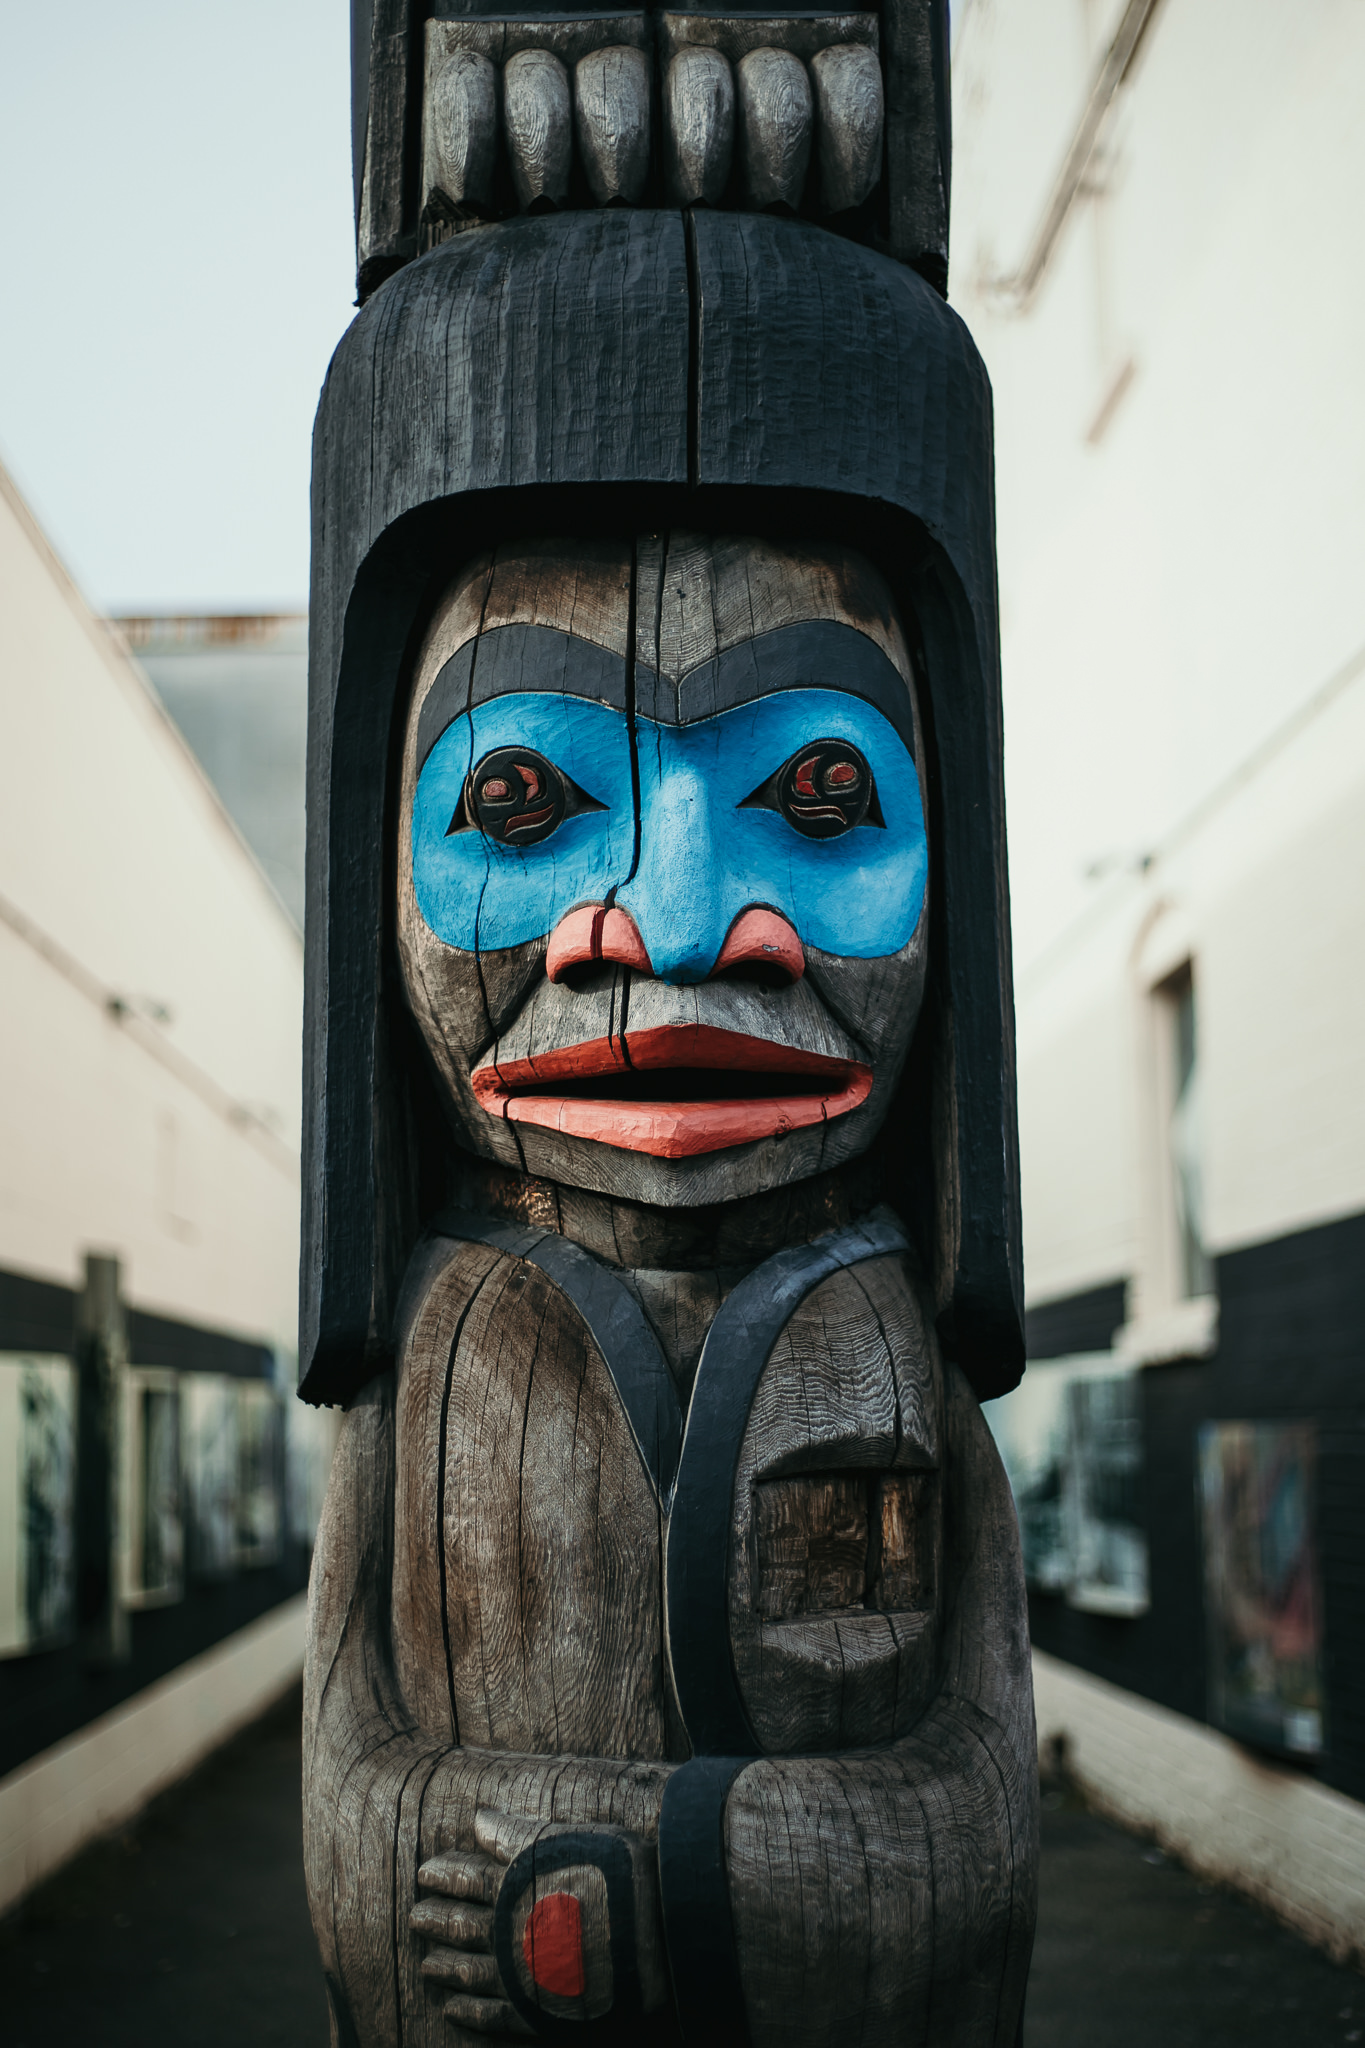 A close up of a totem pole with a blue painted eye mask and red lips and nostrils